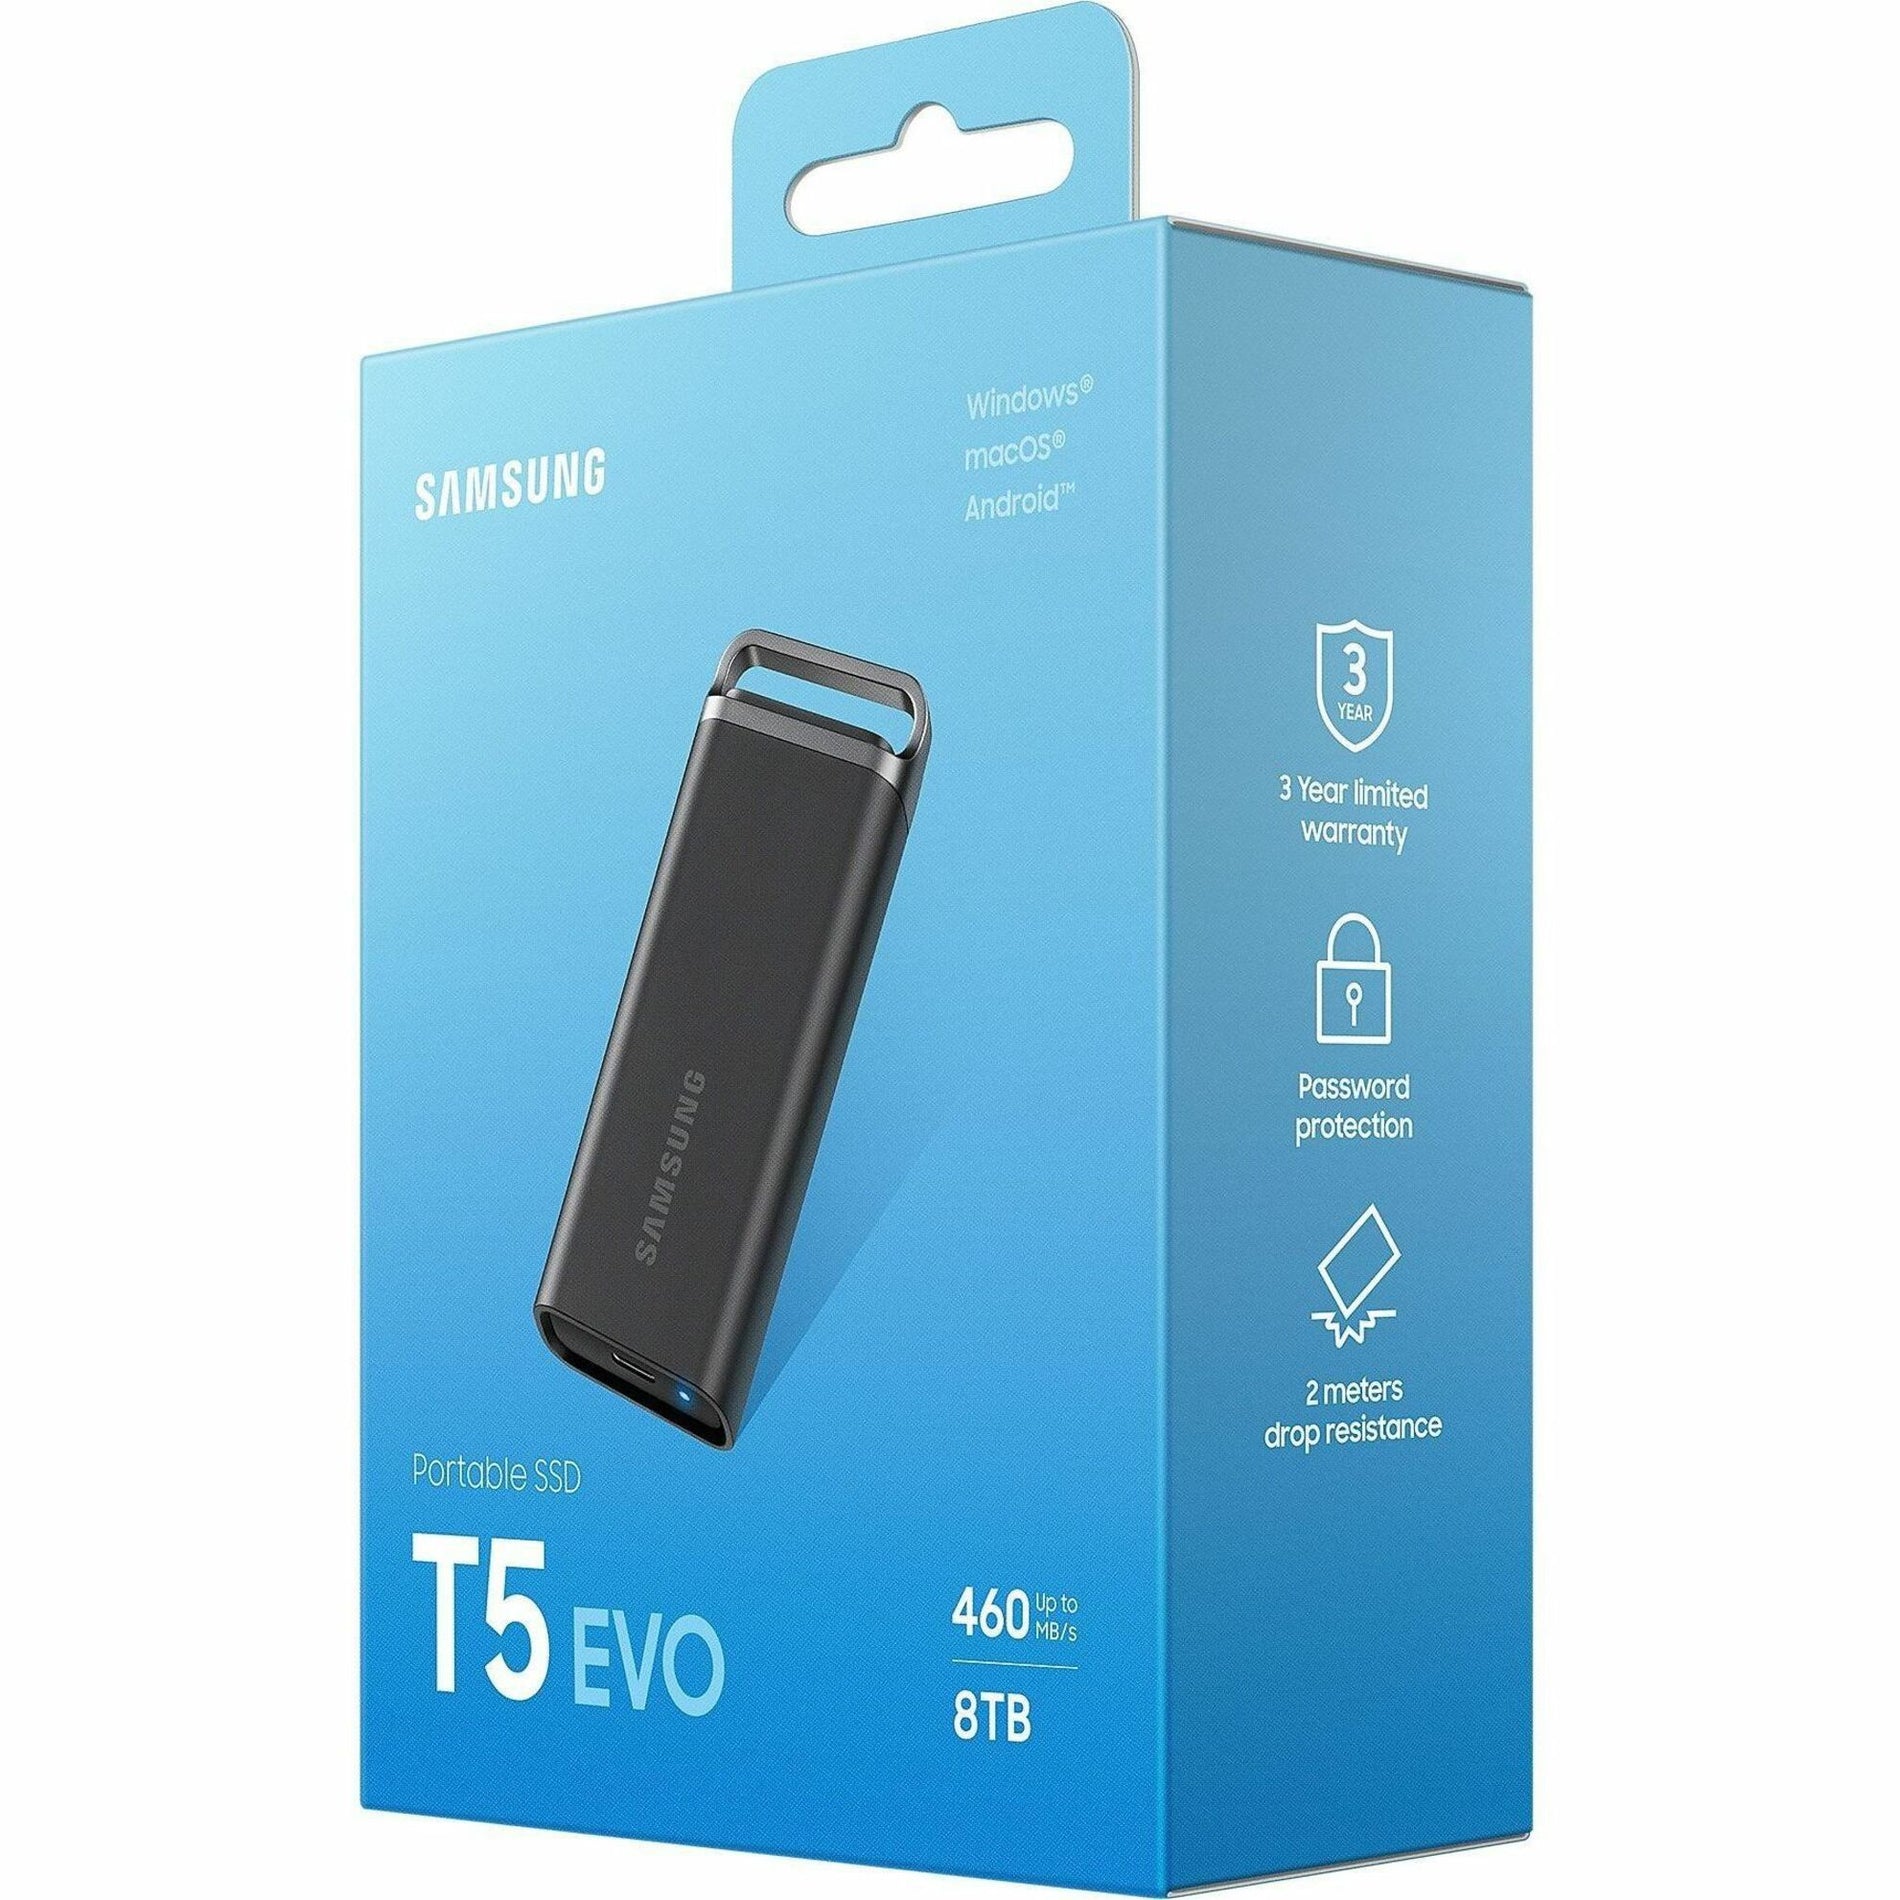 Samsung SSD T5 EVO arrives with up to 8 TB capacity 